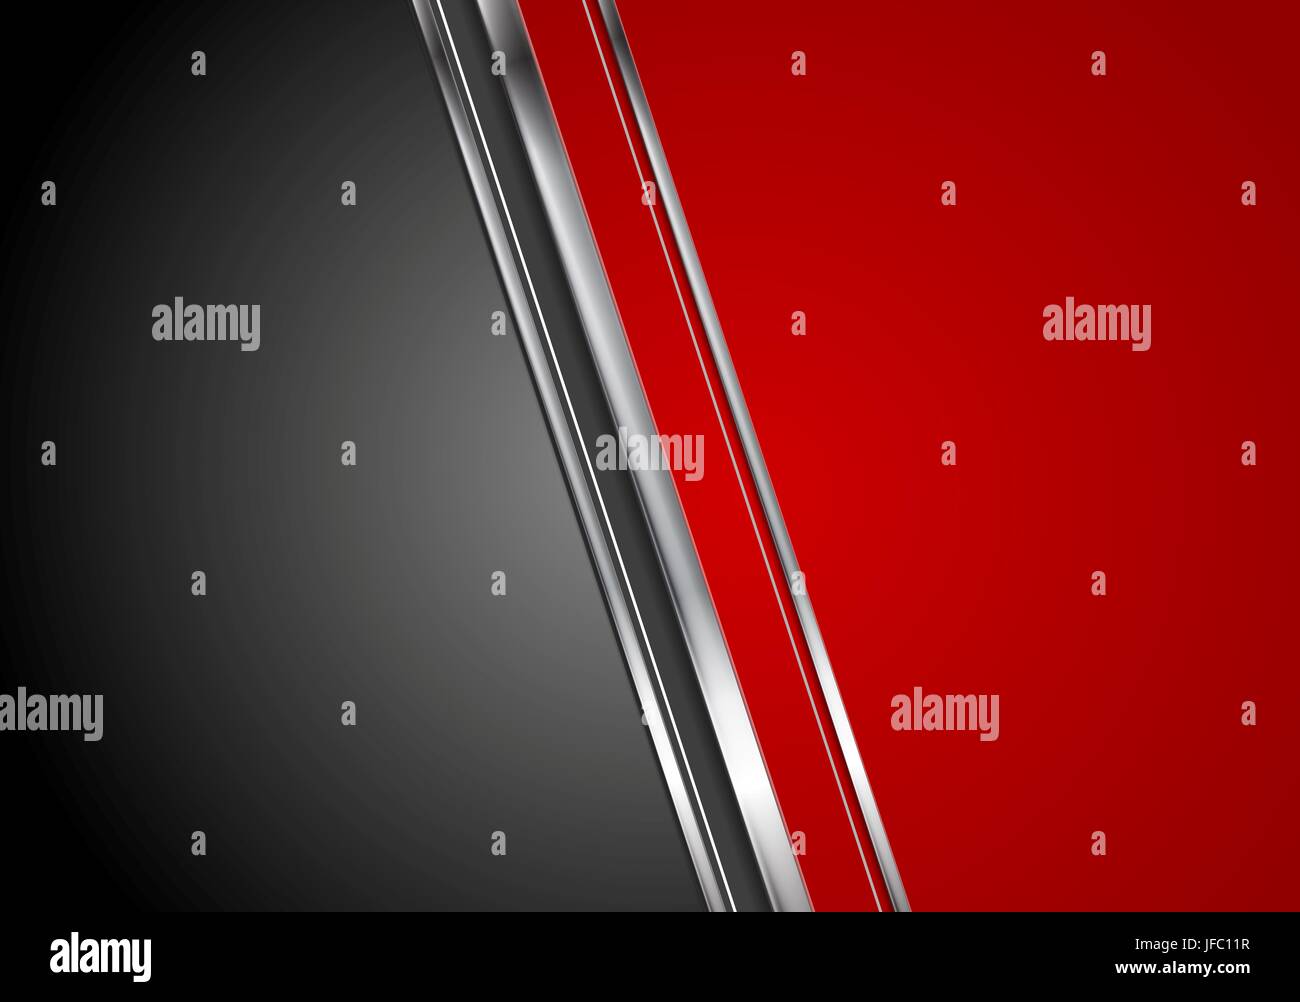 Contrast red black tech background Stock Photo